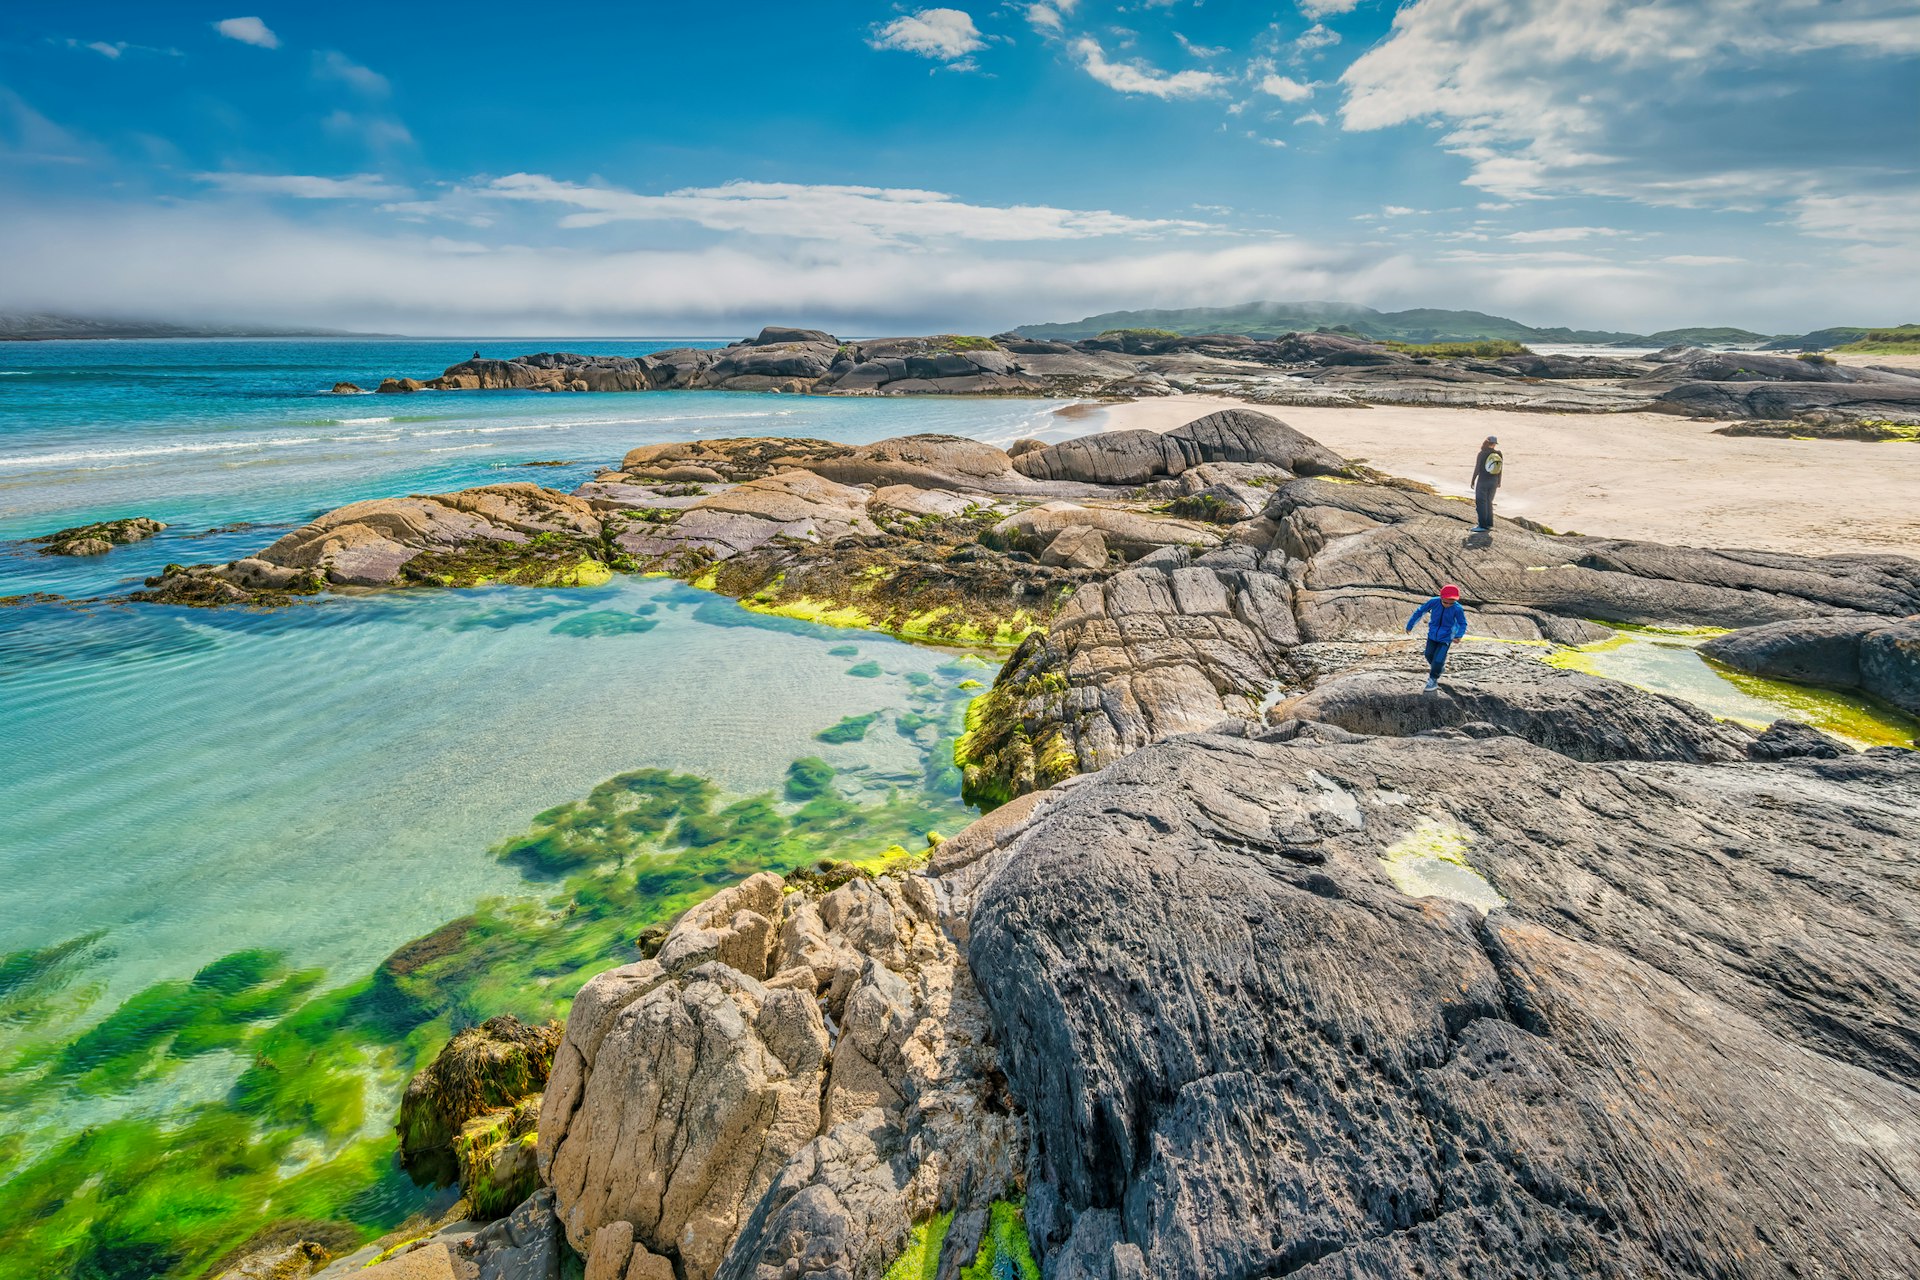 An adult and a child clamber on the rocks above a sandy beach backed by turquoise ocean in Ireland